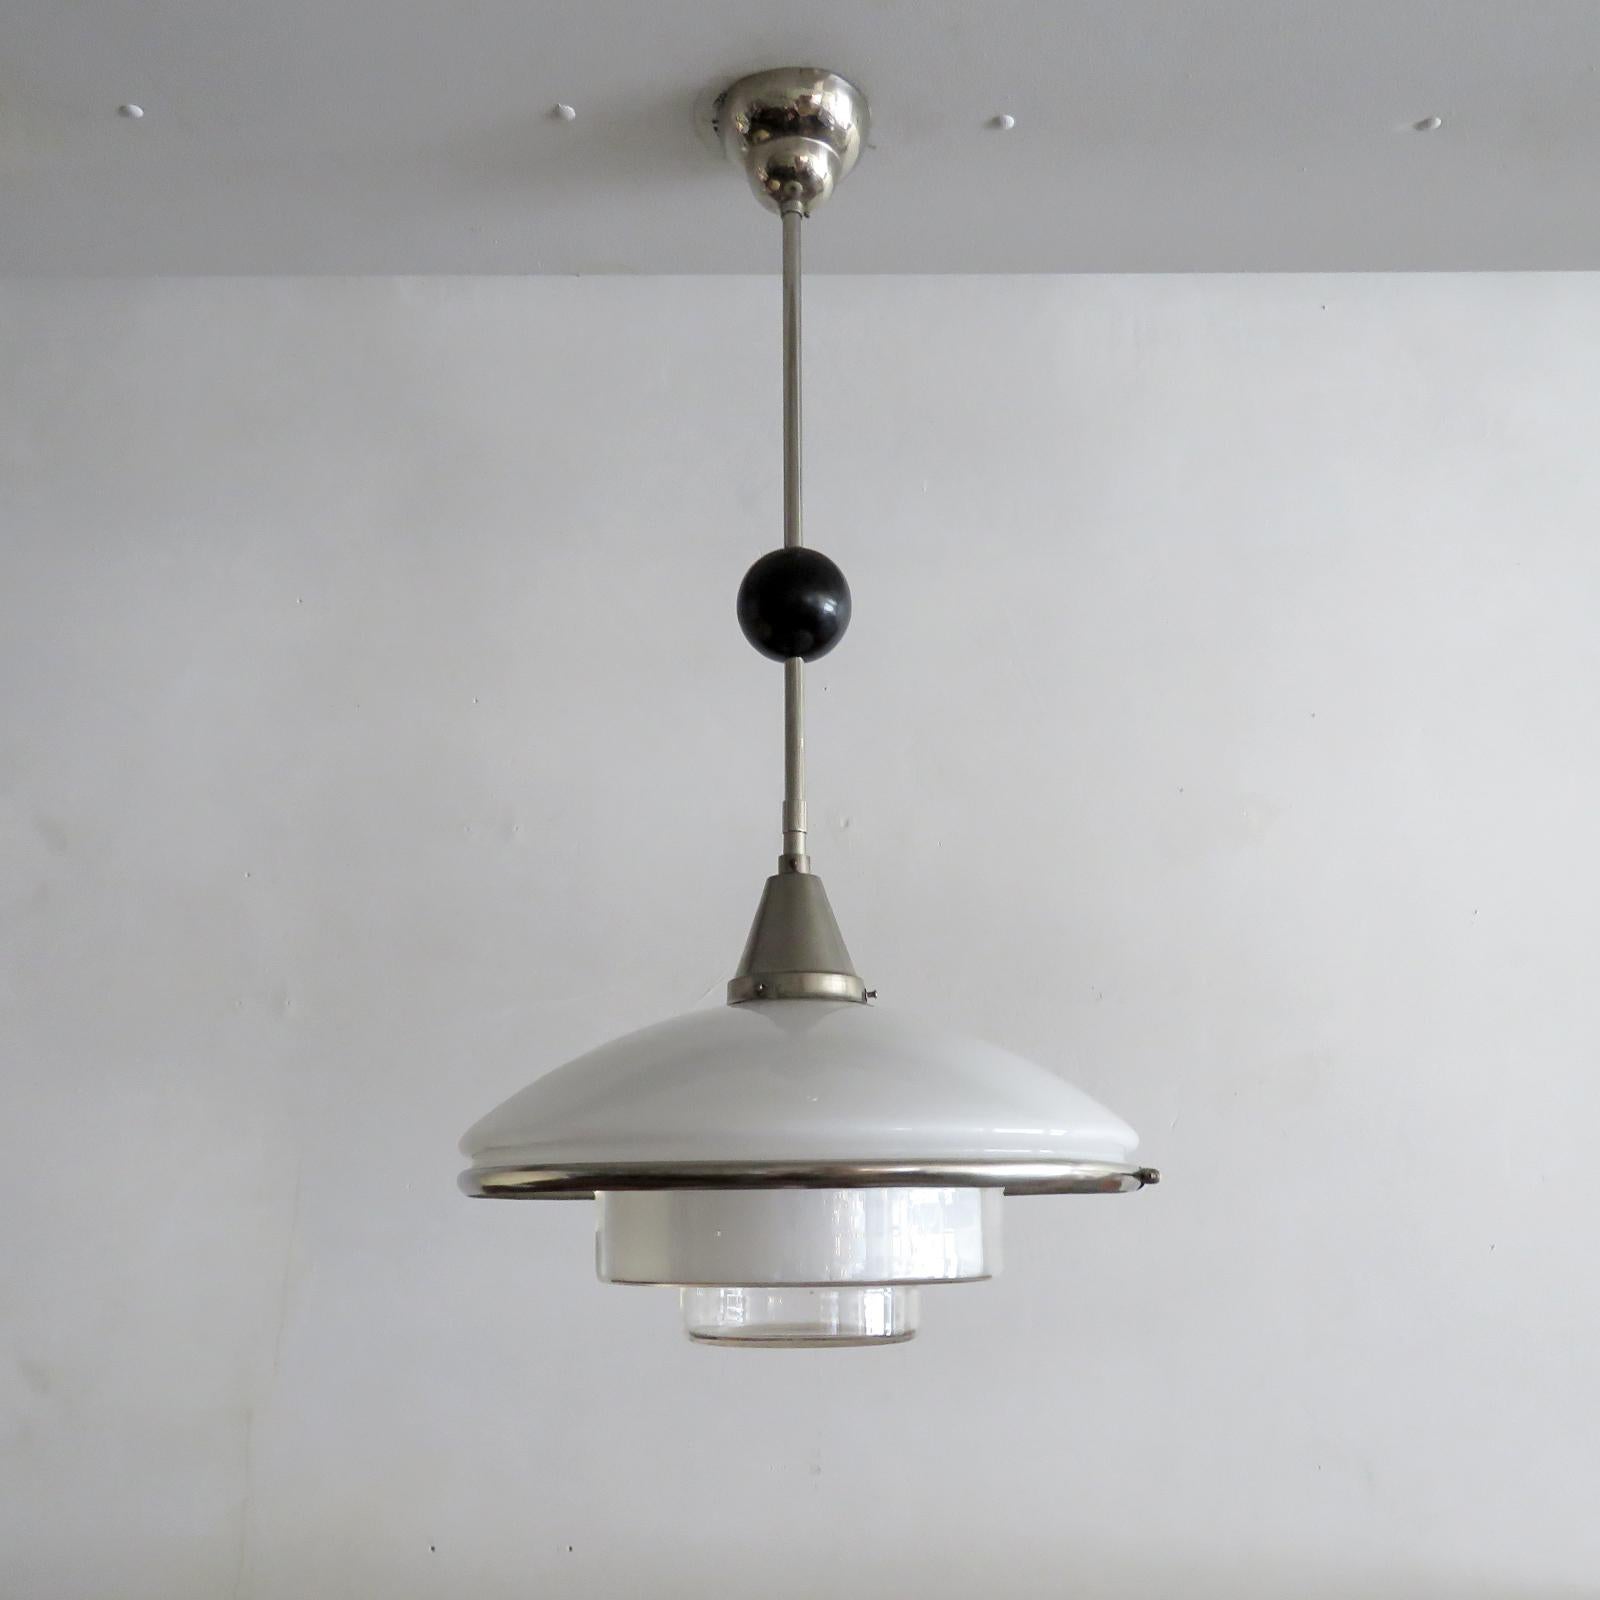 Wonderful pendant light 'P4' designed by Otto Müller for Sistrah Licht and Megaphos Germany, 1931, composed of two main glass elements, a white opaline glass dome and an inverted ziggurat shaped clear glass shade with nickel-plated belt, nickel